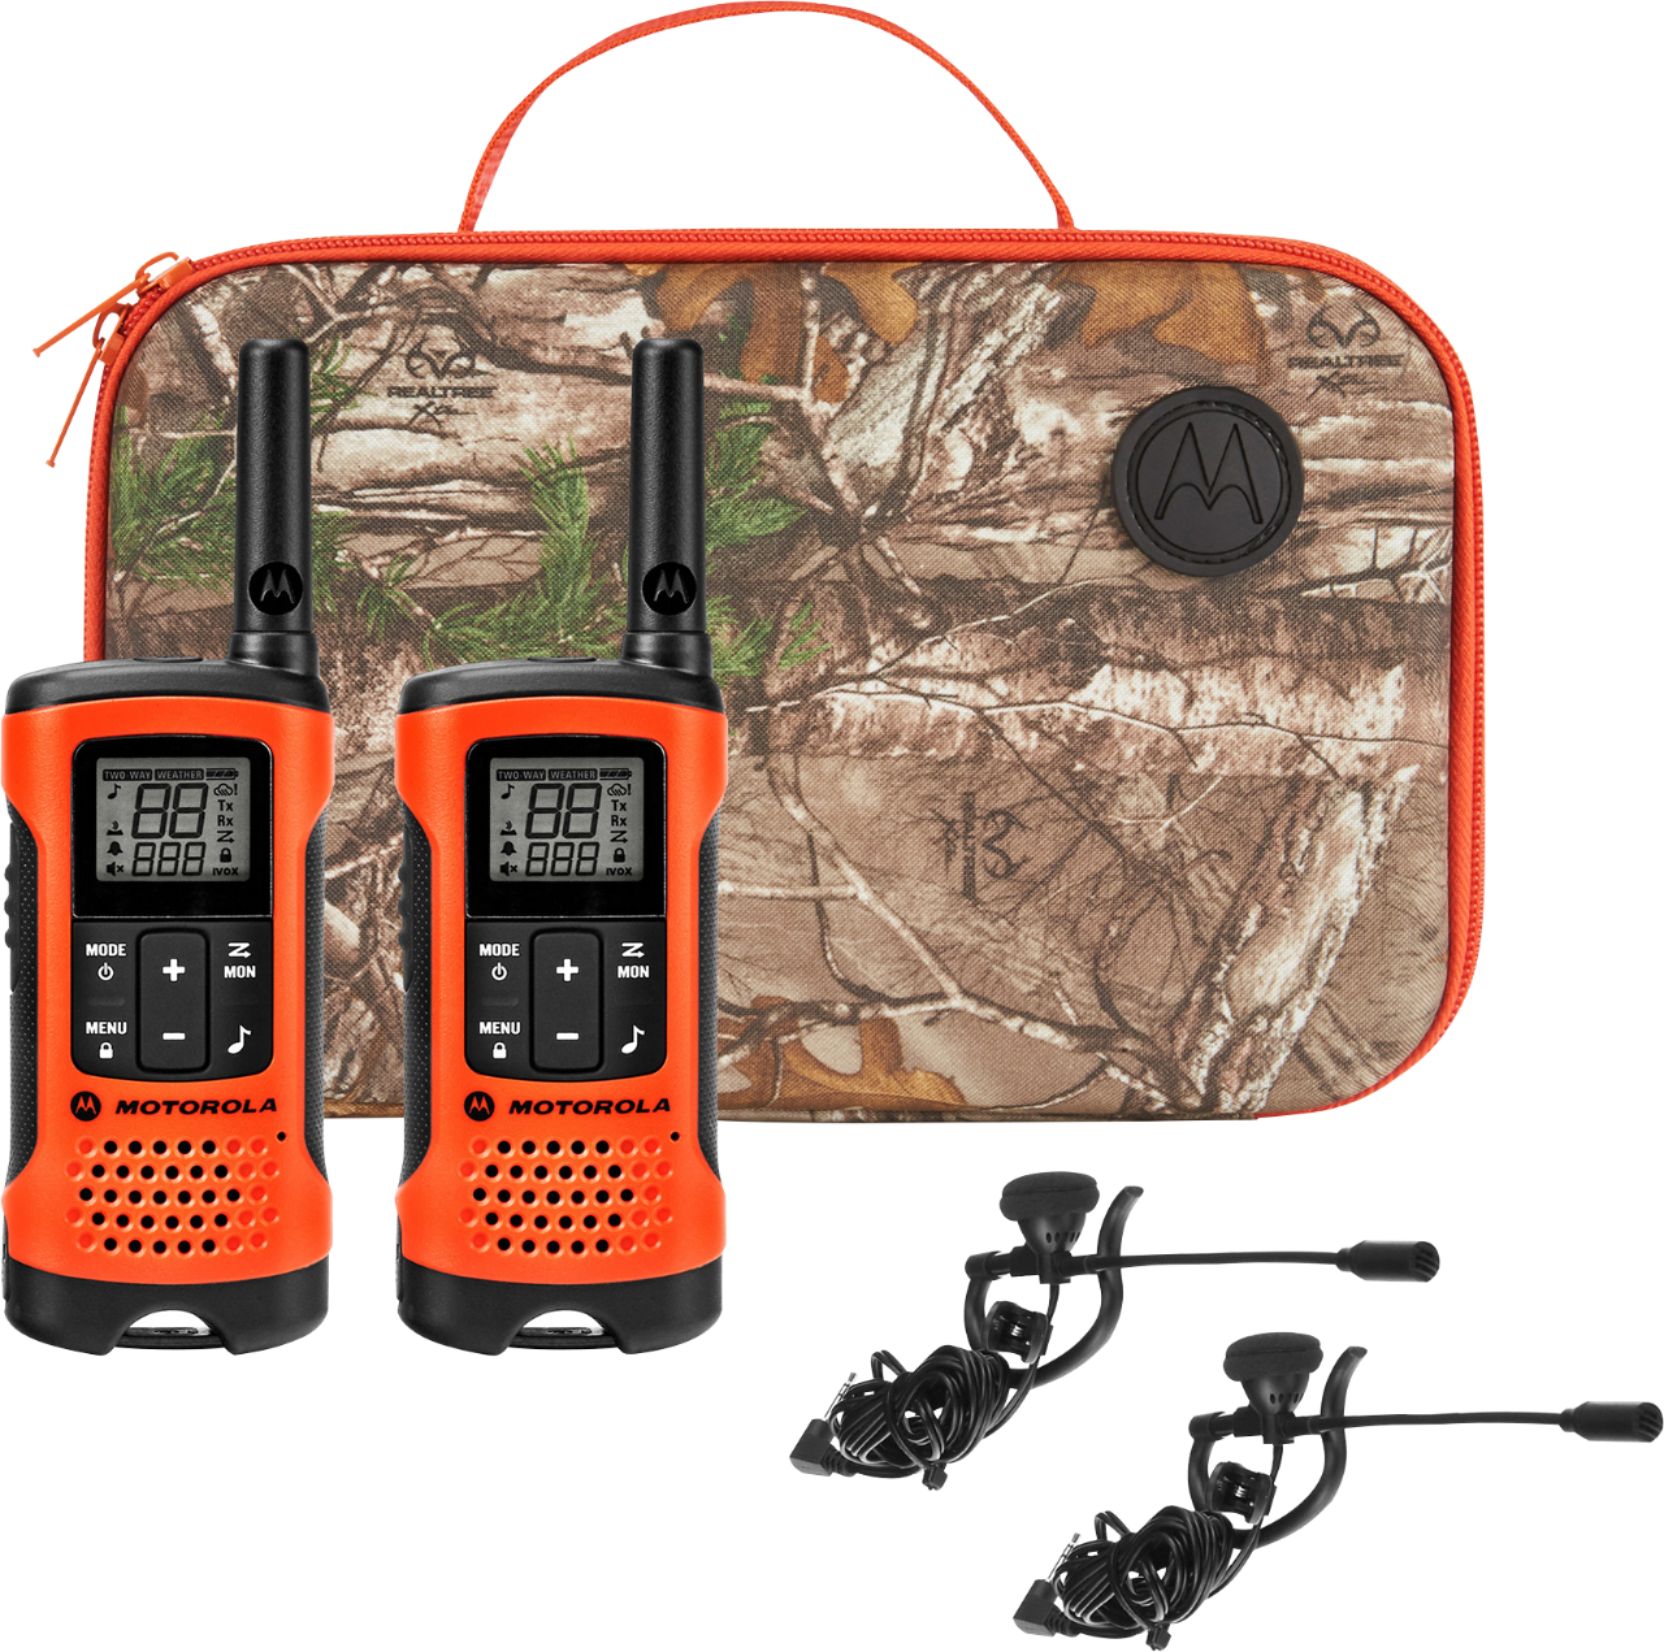 Angle View: Motorola - Talkabout 25-Mile, 22-Channel FRS/GMRS 2-Way Radios (Pair) - Blaze orange